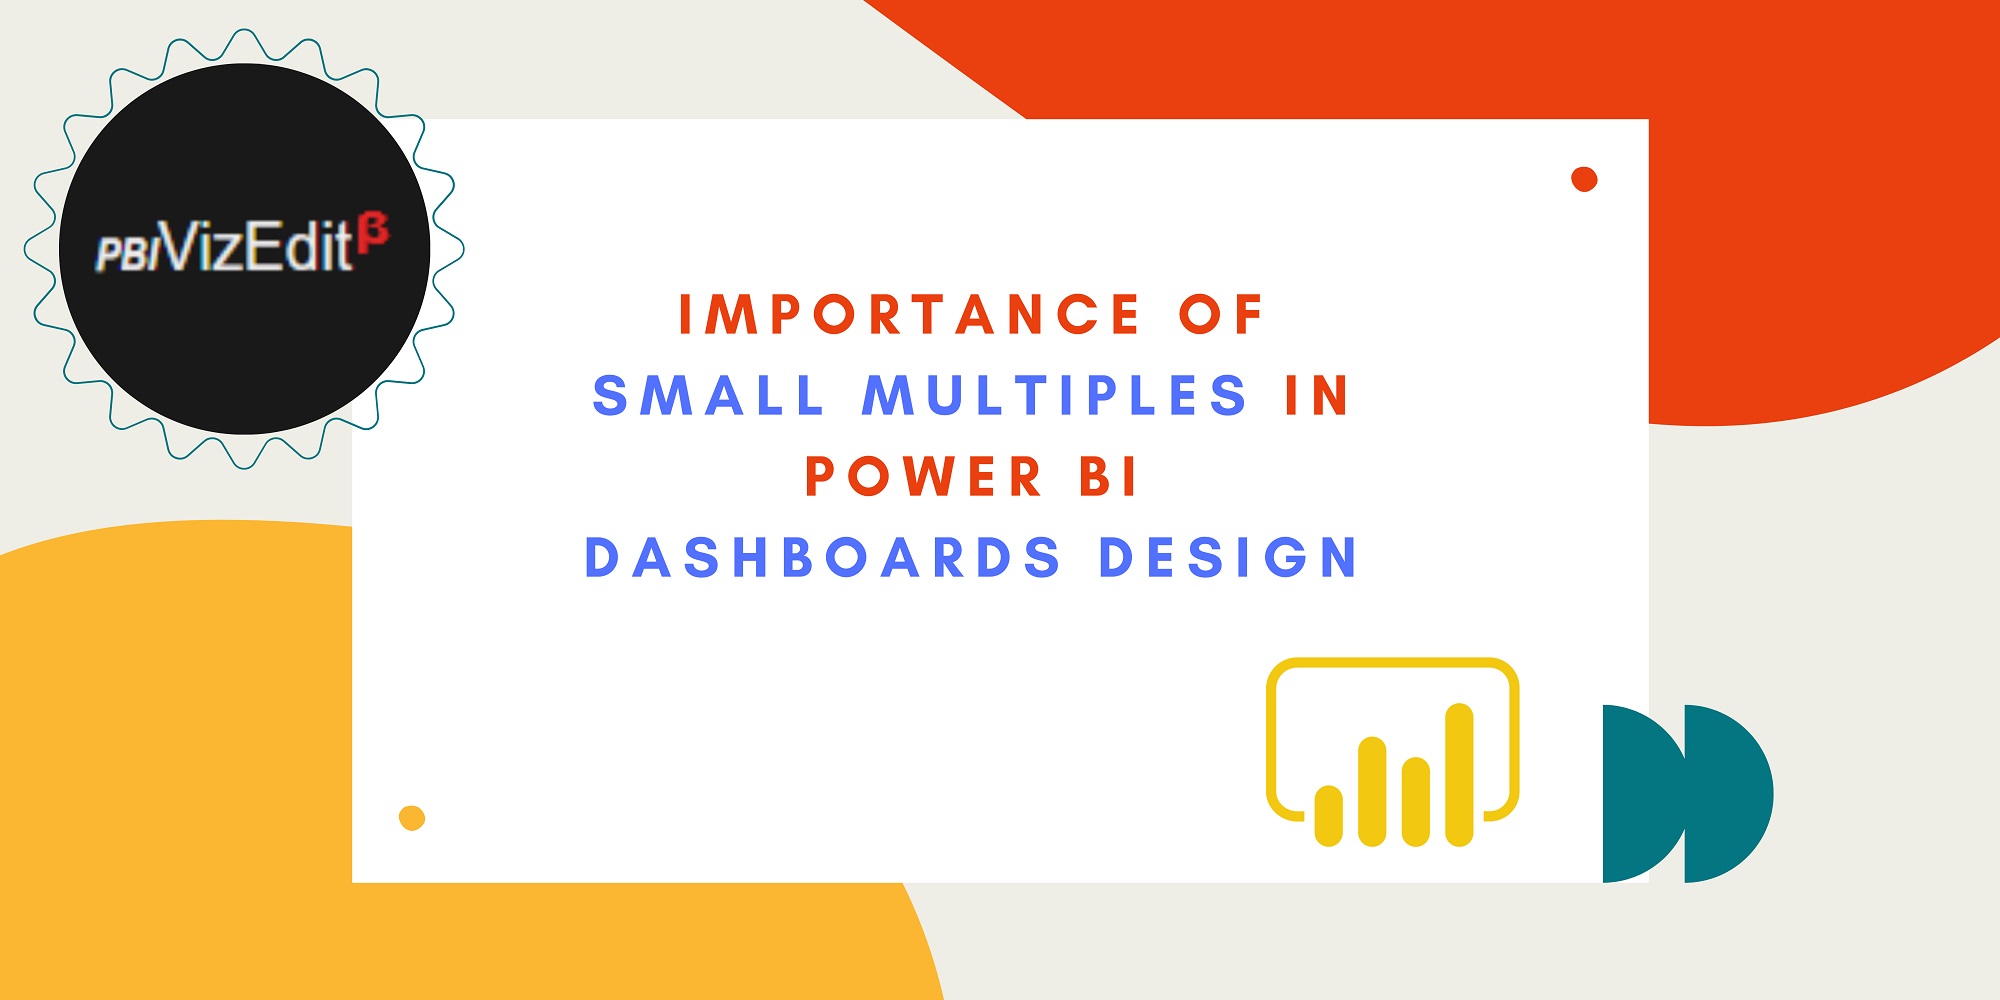 Importance of small multiples in Power BI dashboards design